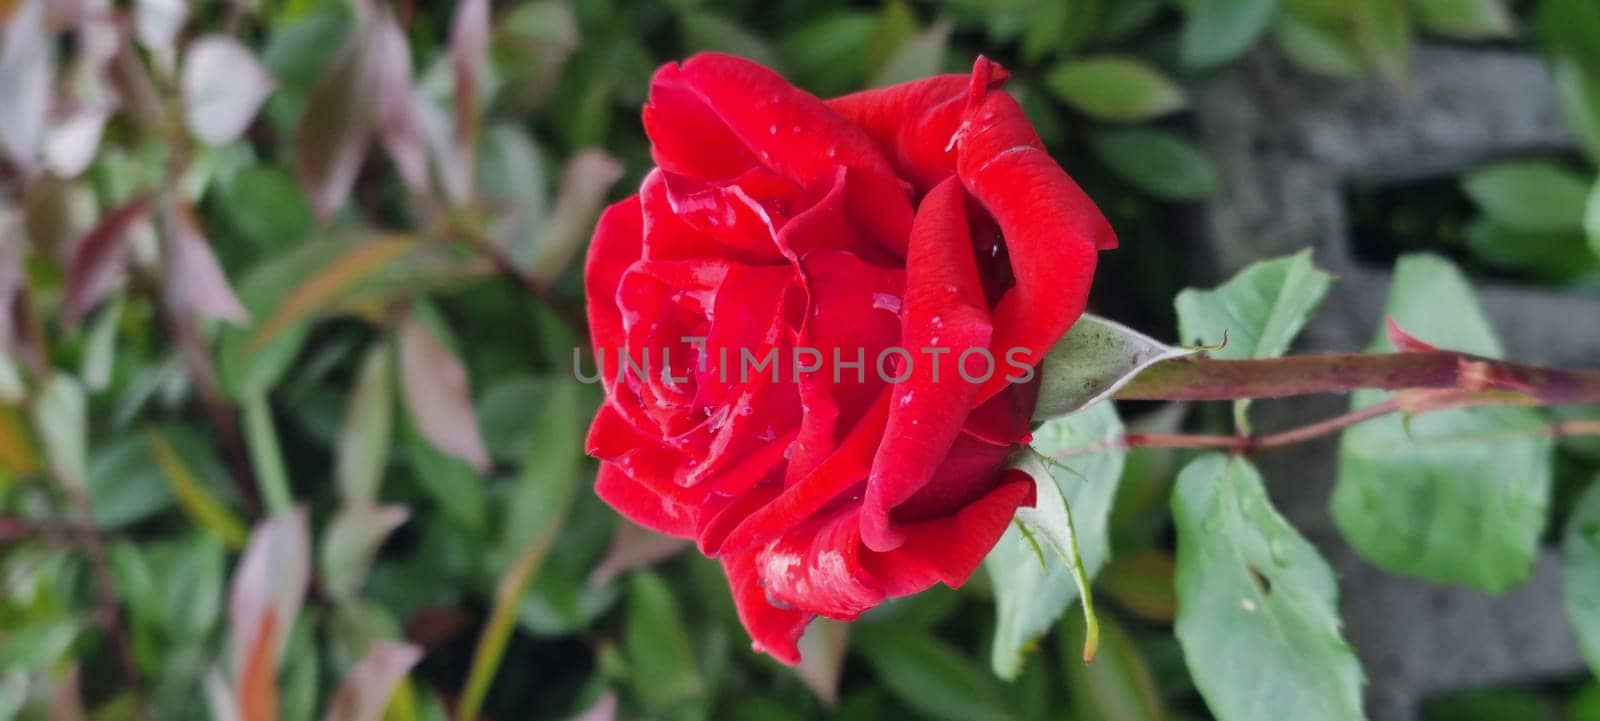 Vibrant red rose bloom with dew drops by FlightVideo